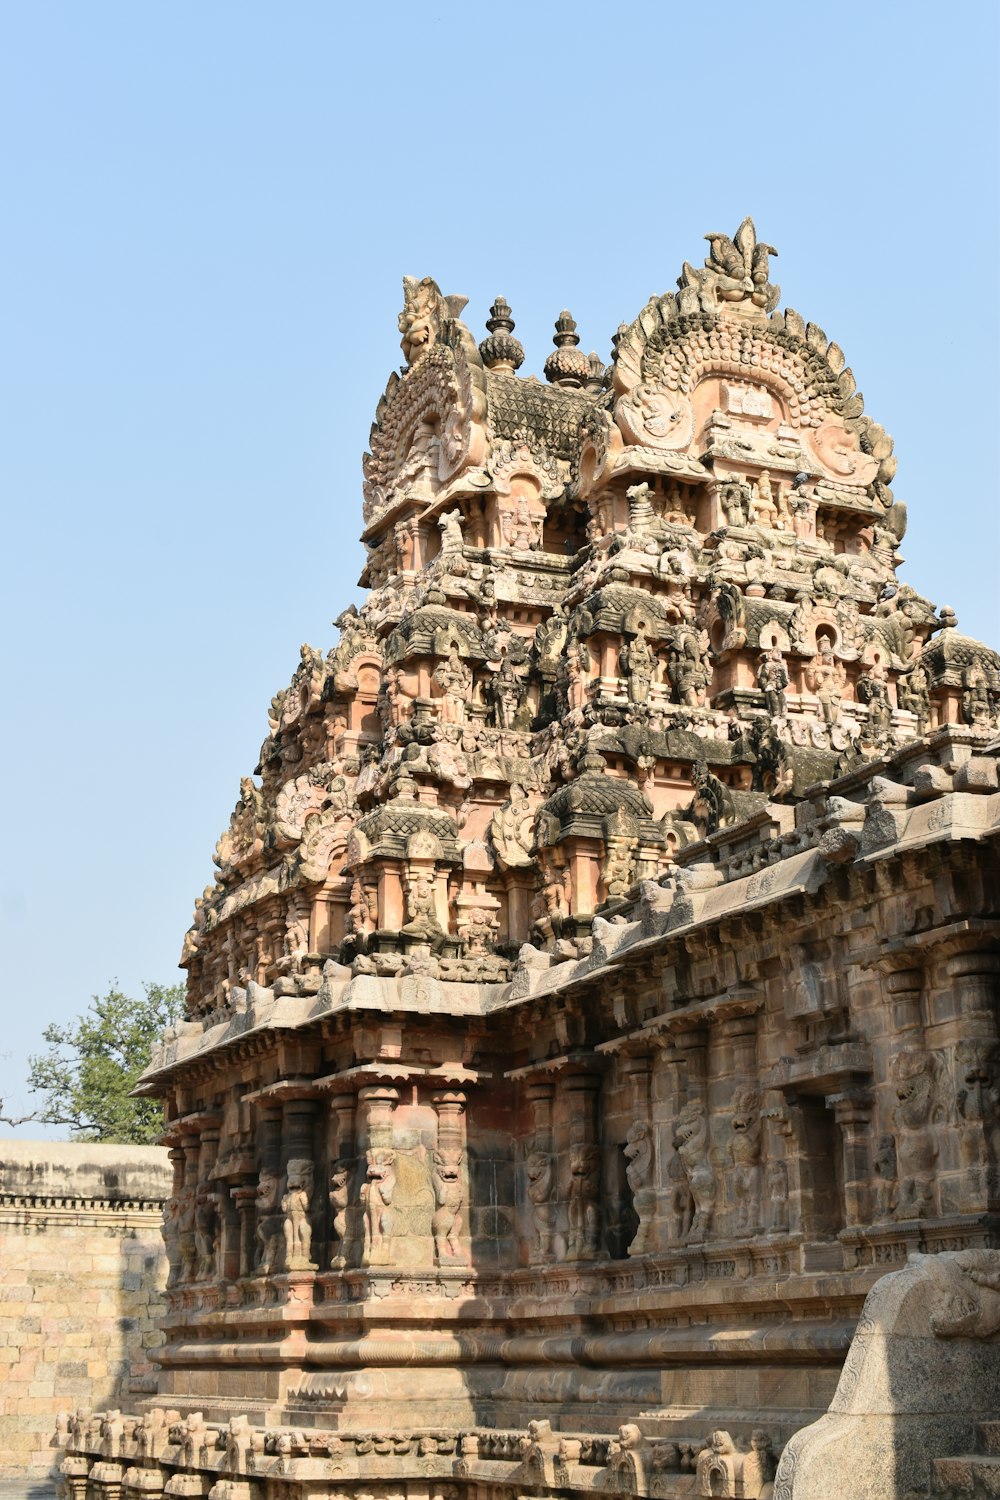 a large stone structure with many carvings on it